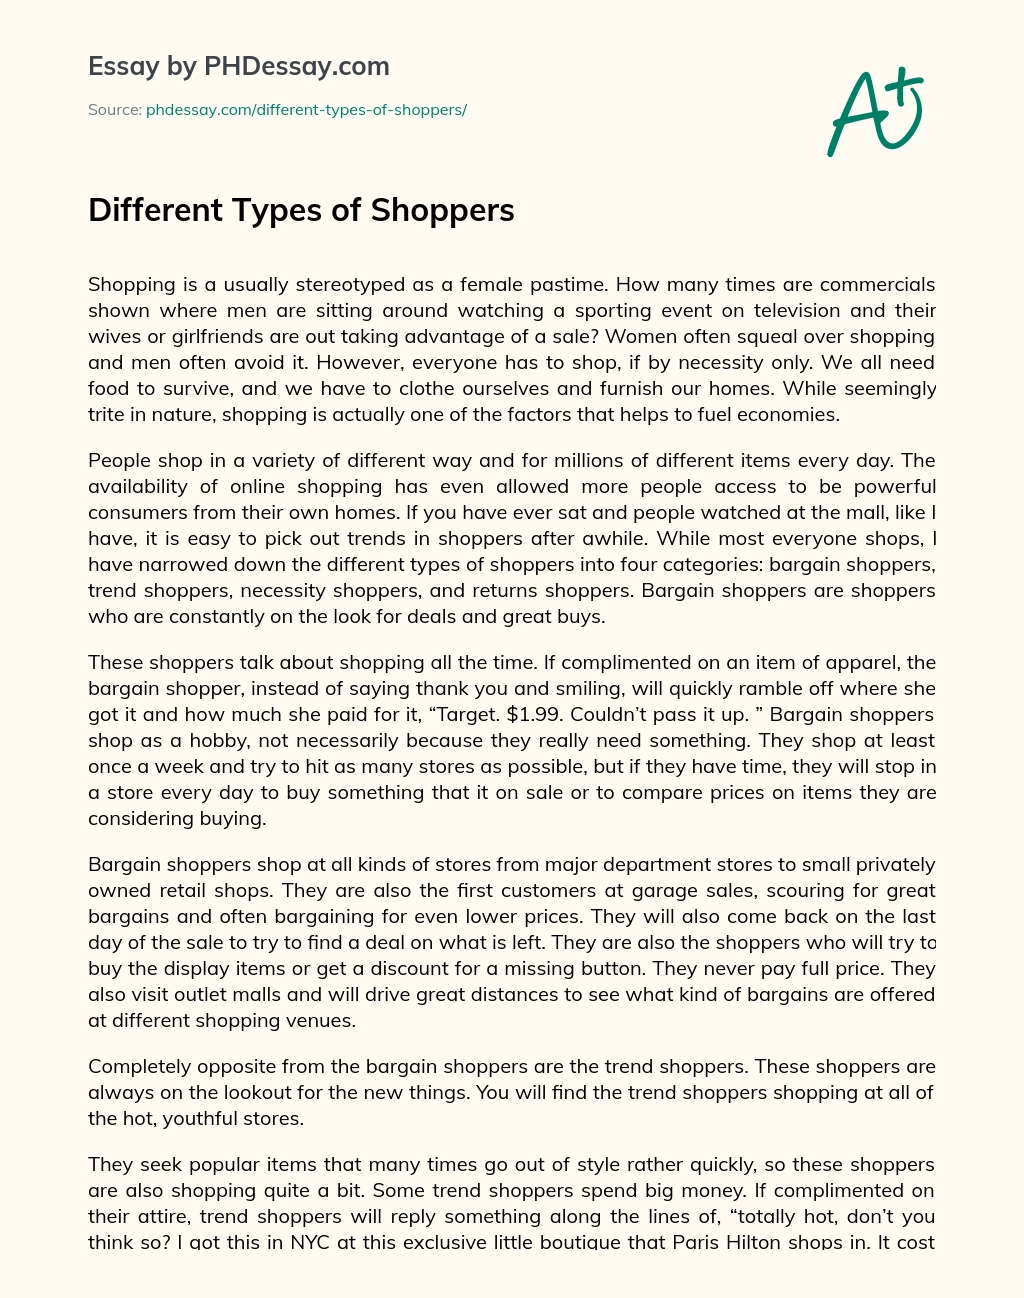 classification essay on shoppers